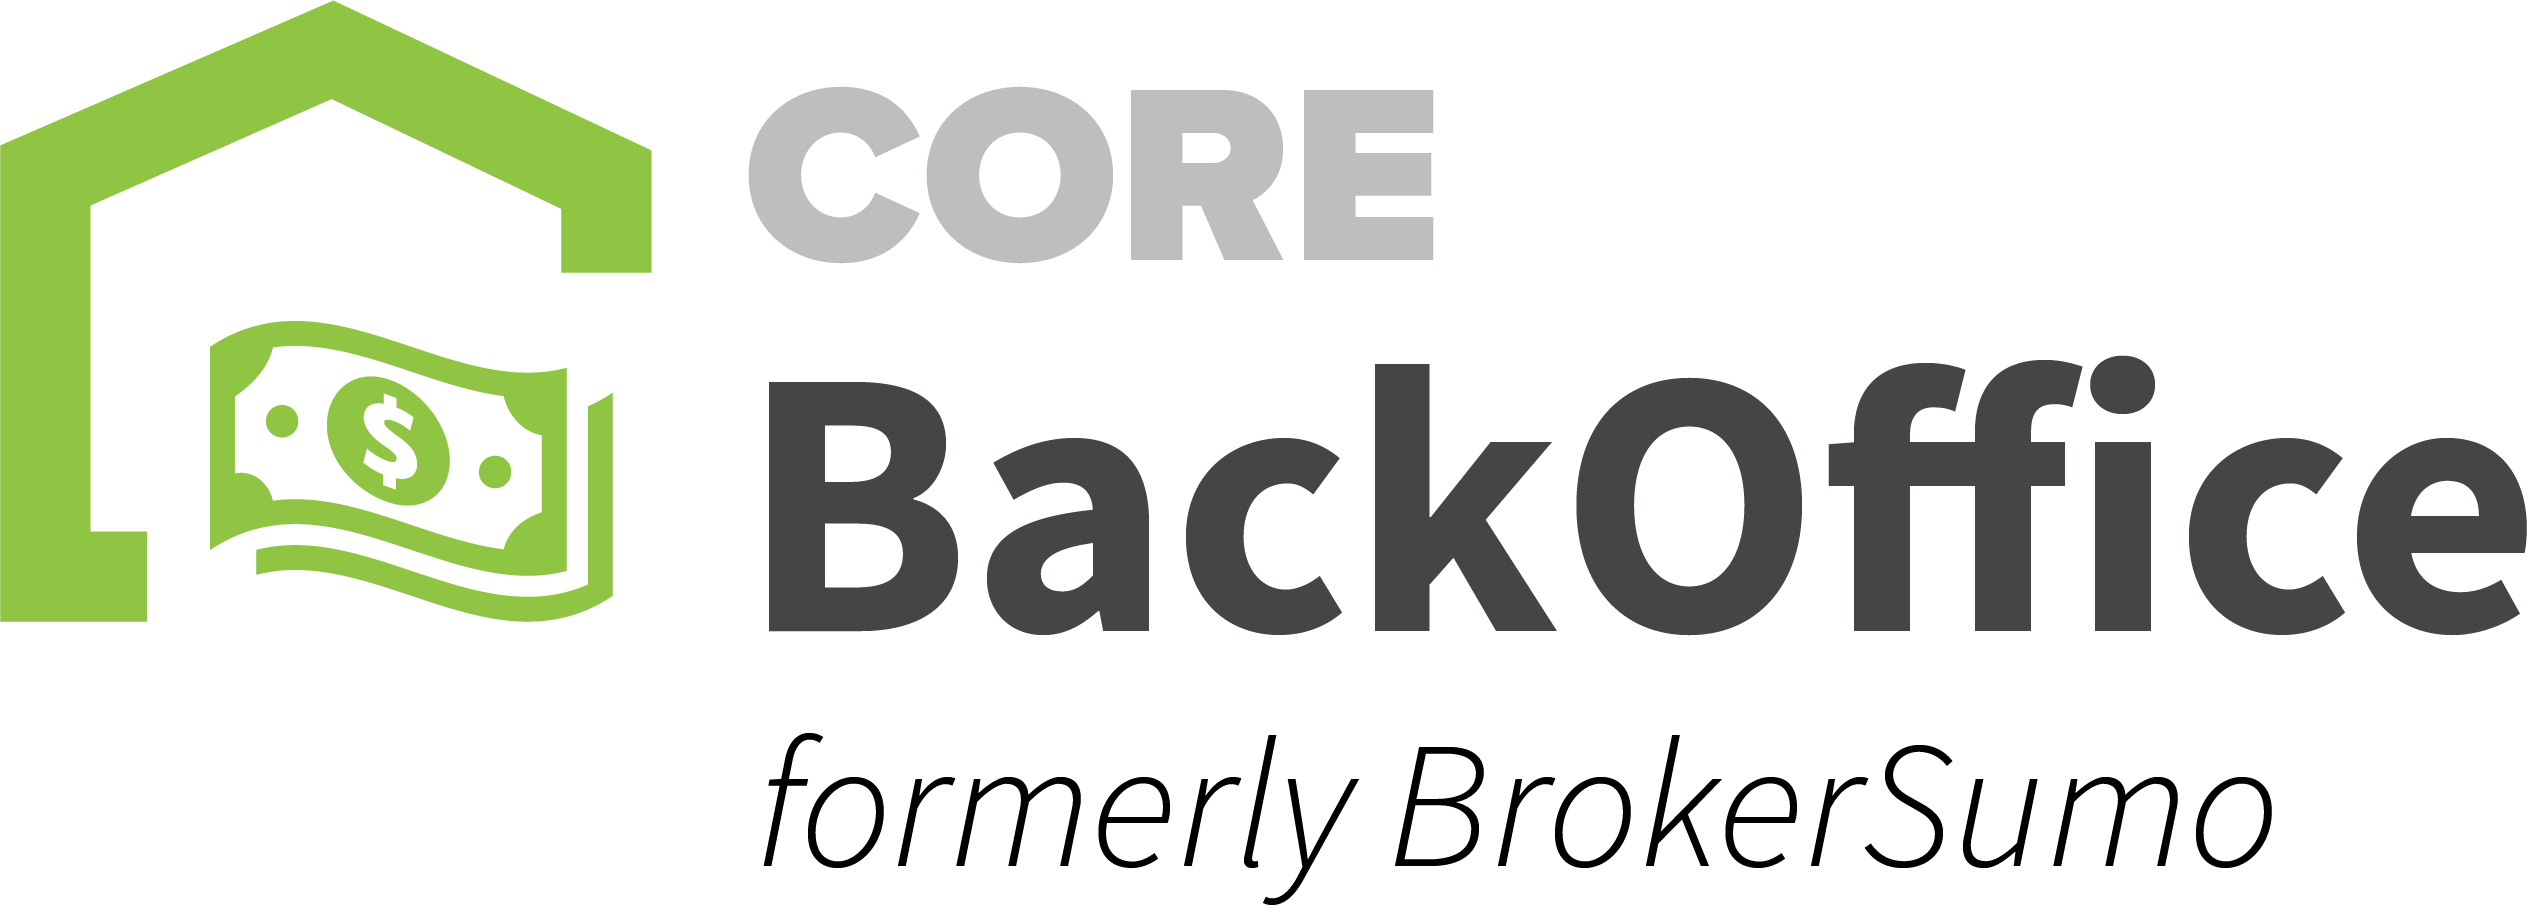 ire core backoffice